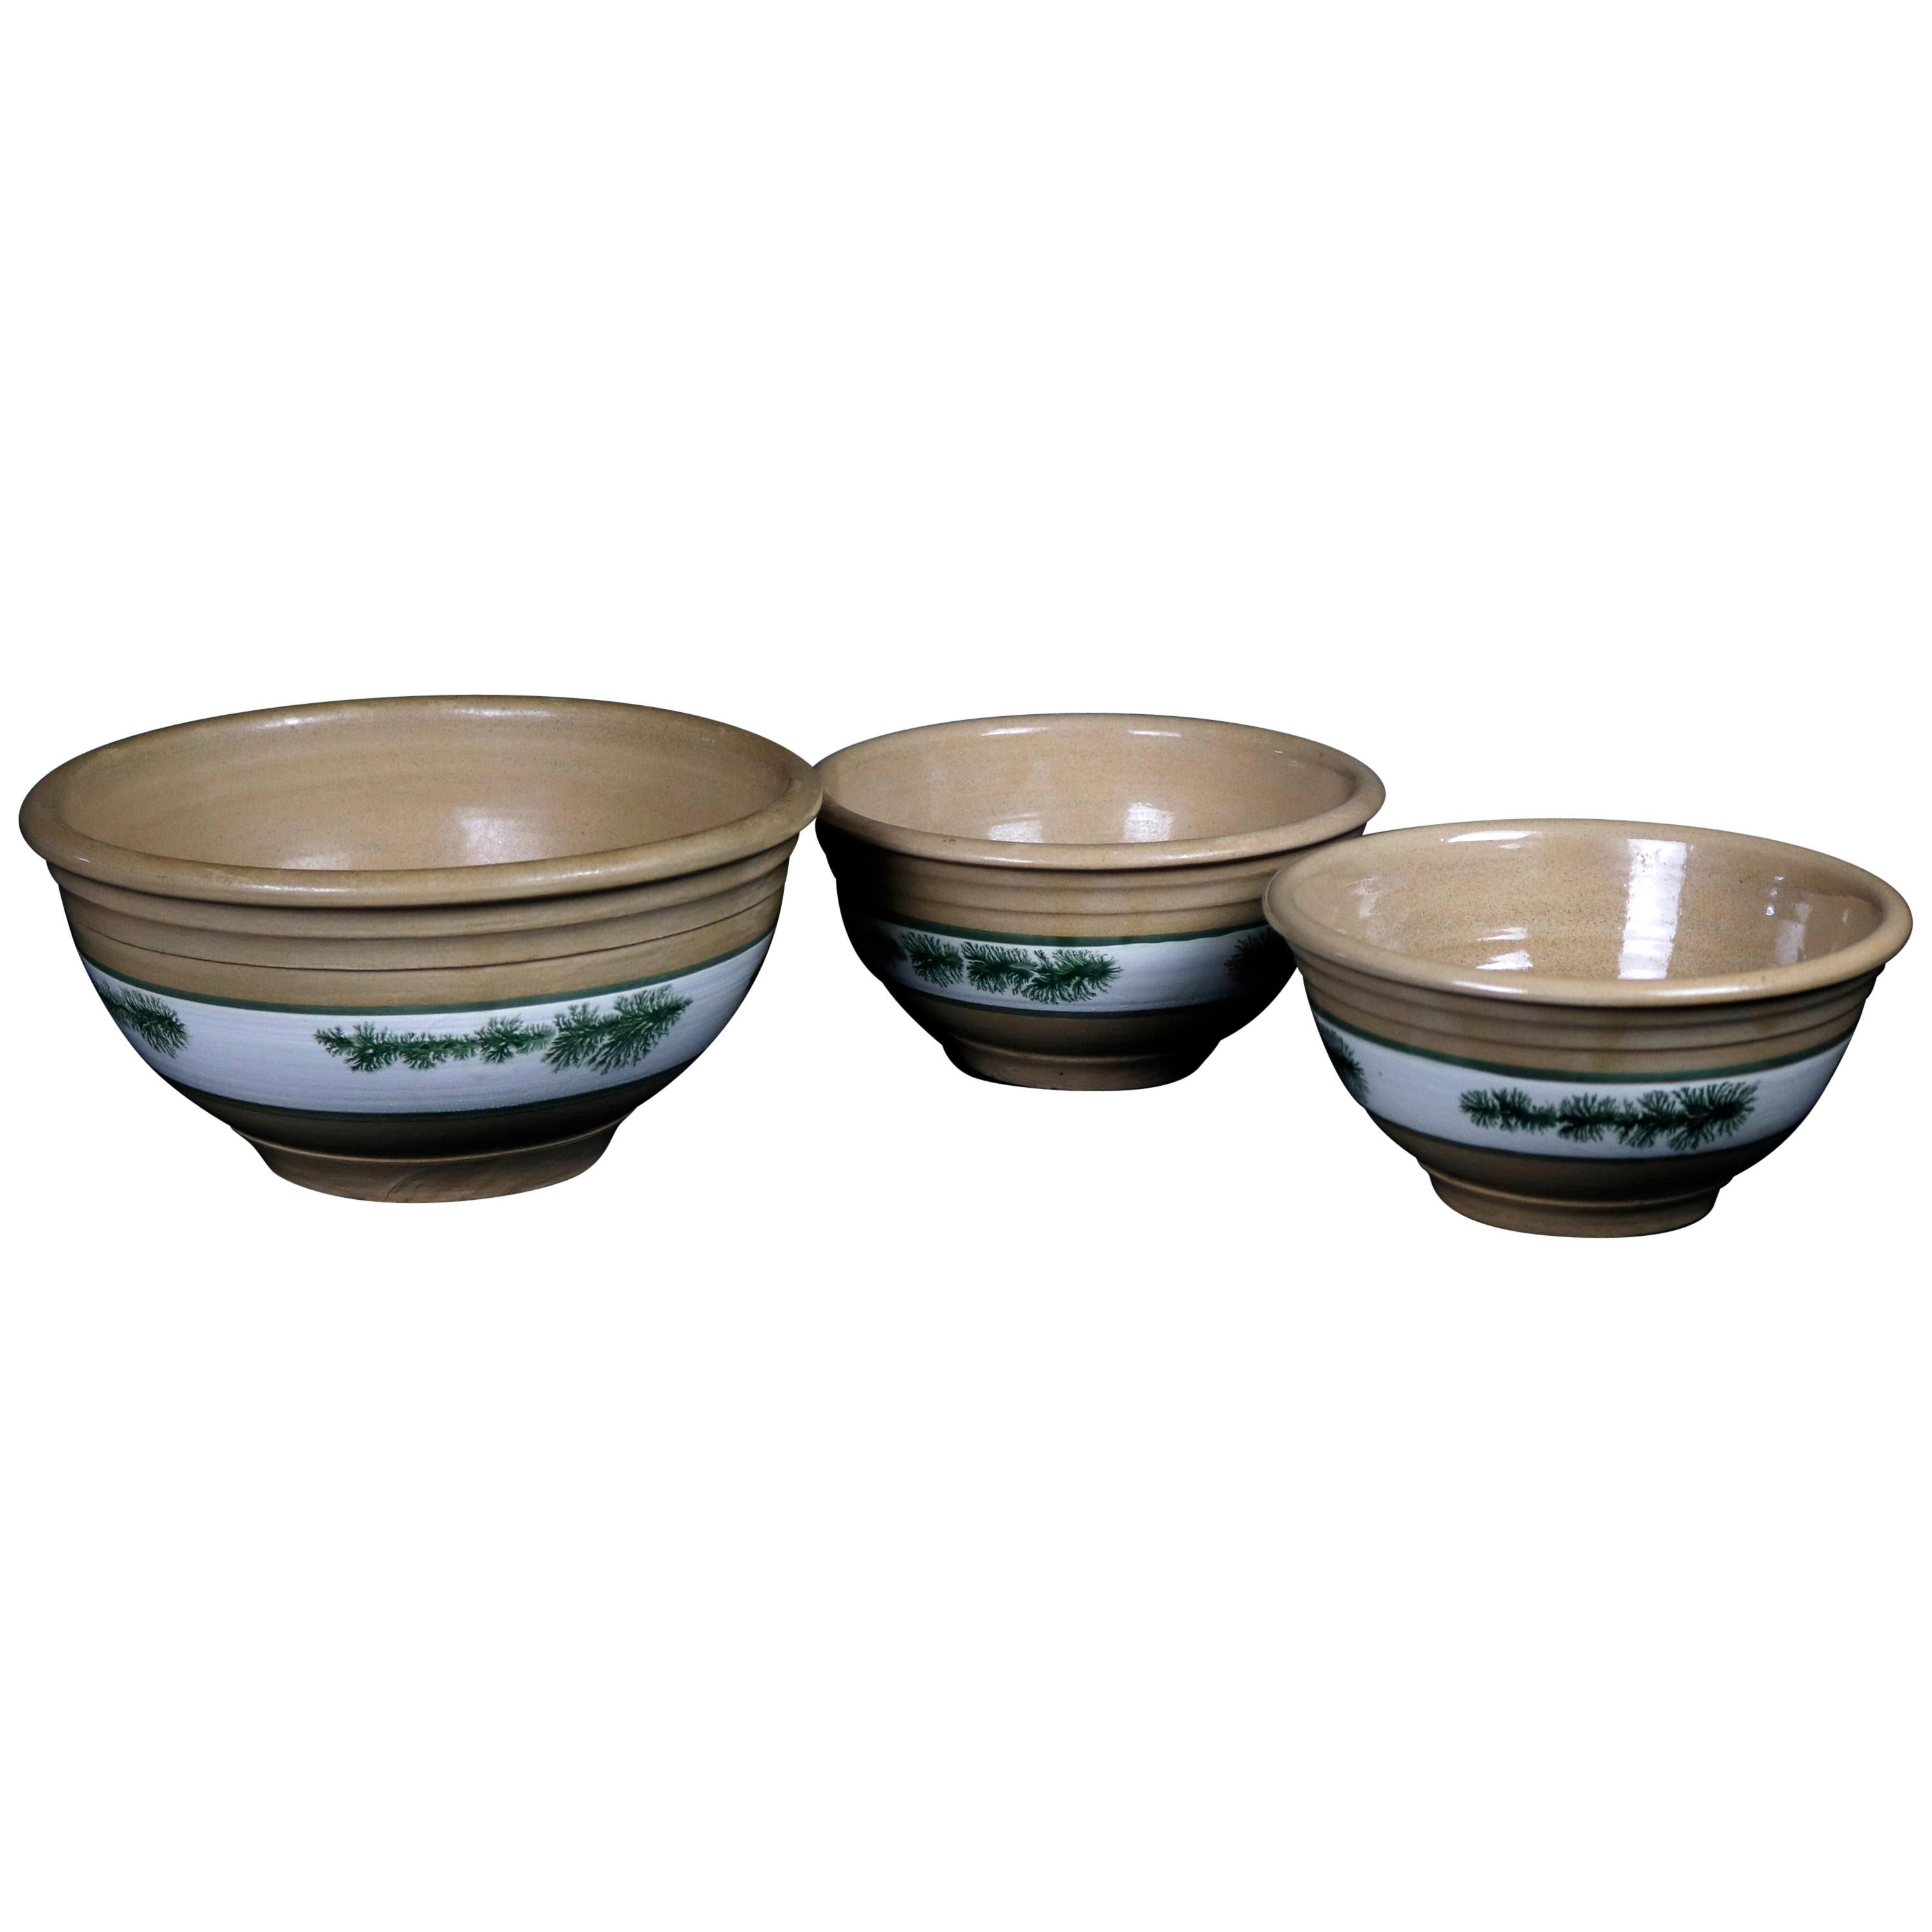 Nested Set of 3 Seaweed Mocha Decorated Pottery Mixing Bowls, 20th Century